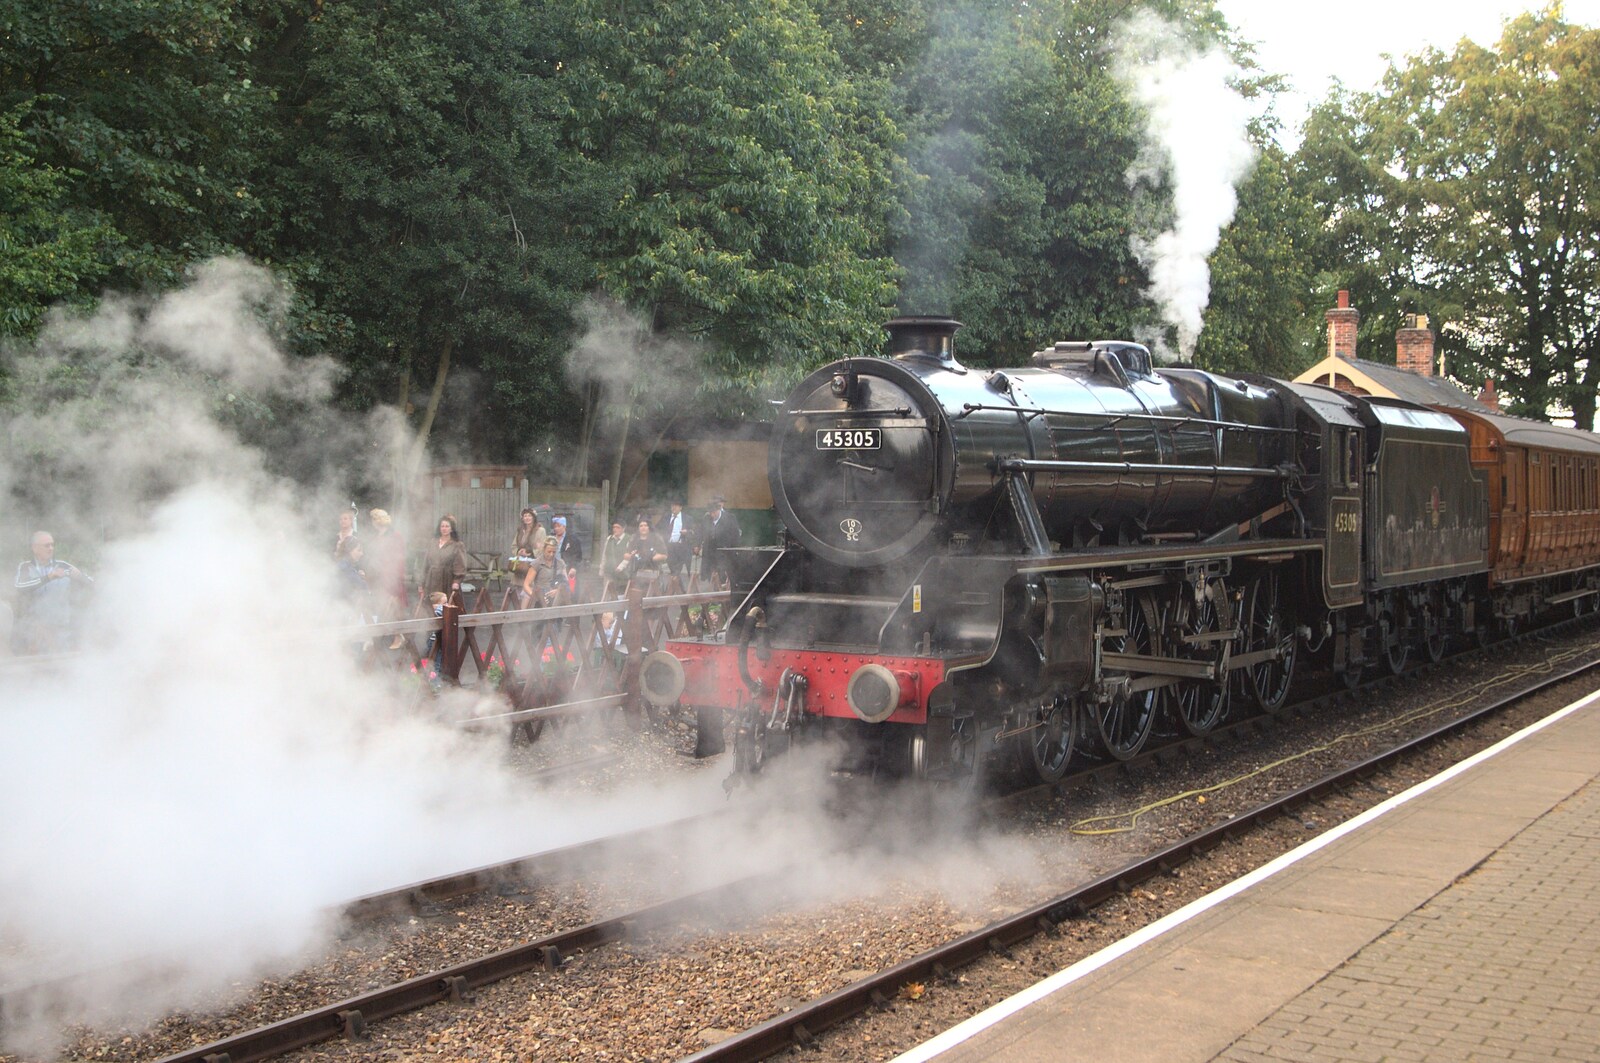 Stanier Class 5 loco 45305 gets its steam on from The 1940s Steam Train Weekend, Holt, Norfolk - 18th September 2011